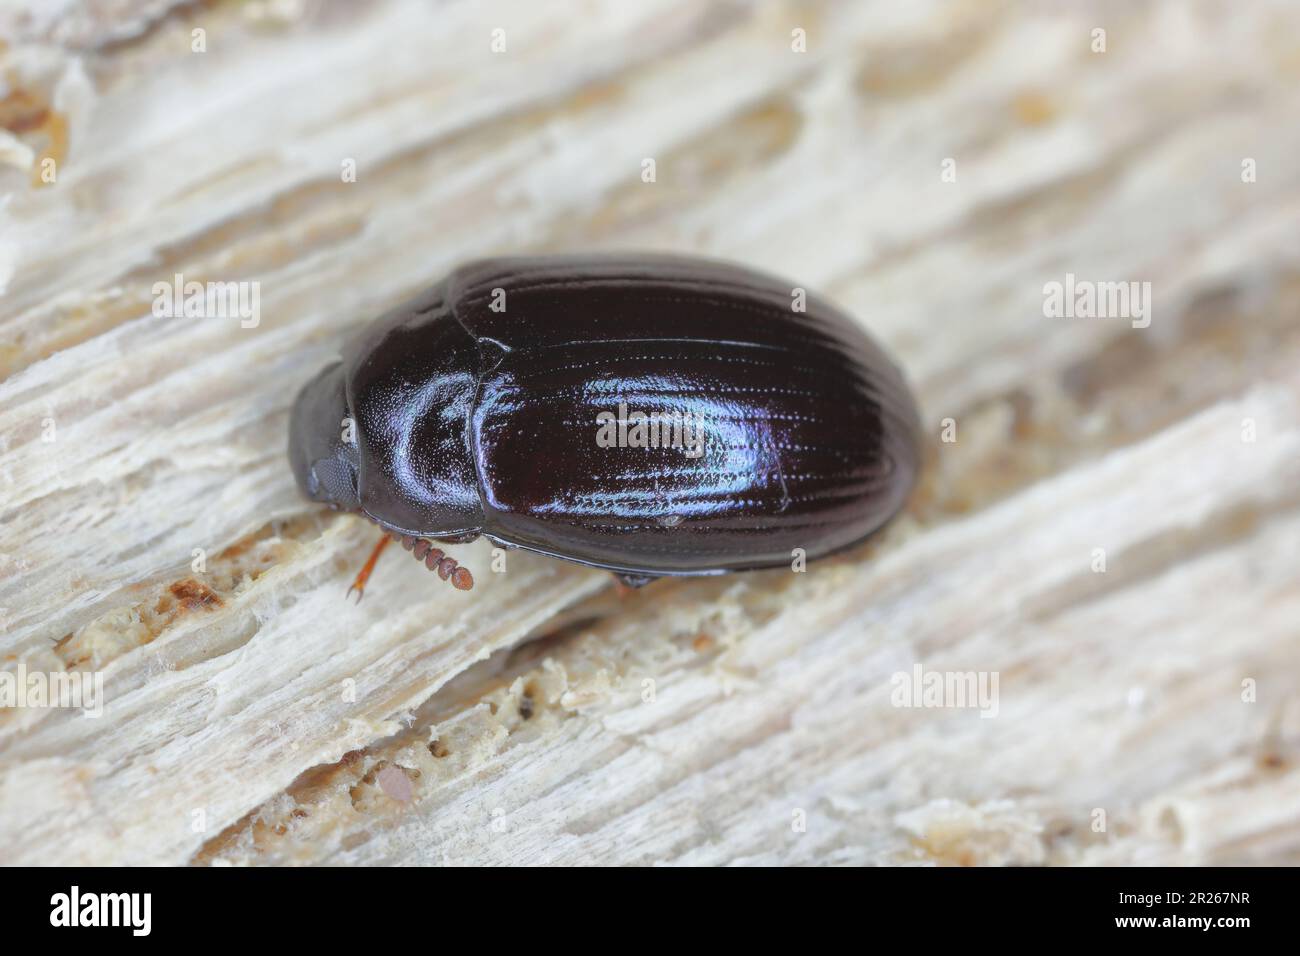 Platydema violaceum, darkling beetle (Tenebionidae). An insect found under the bark of a dead tree. Stock Photo